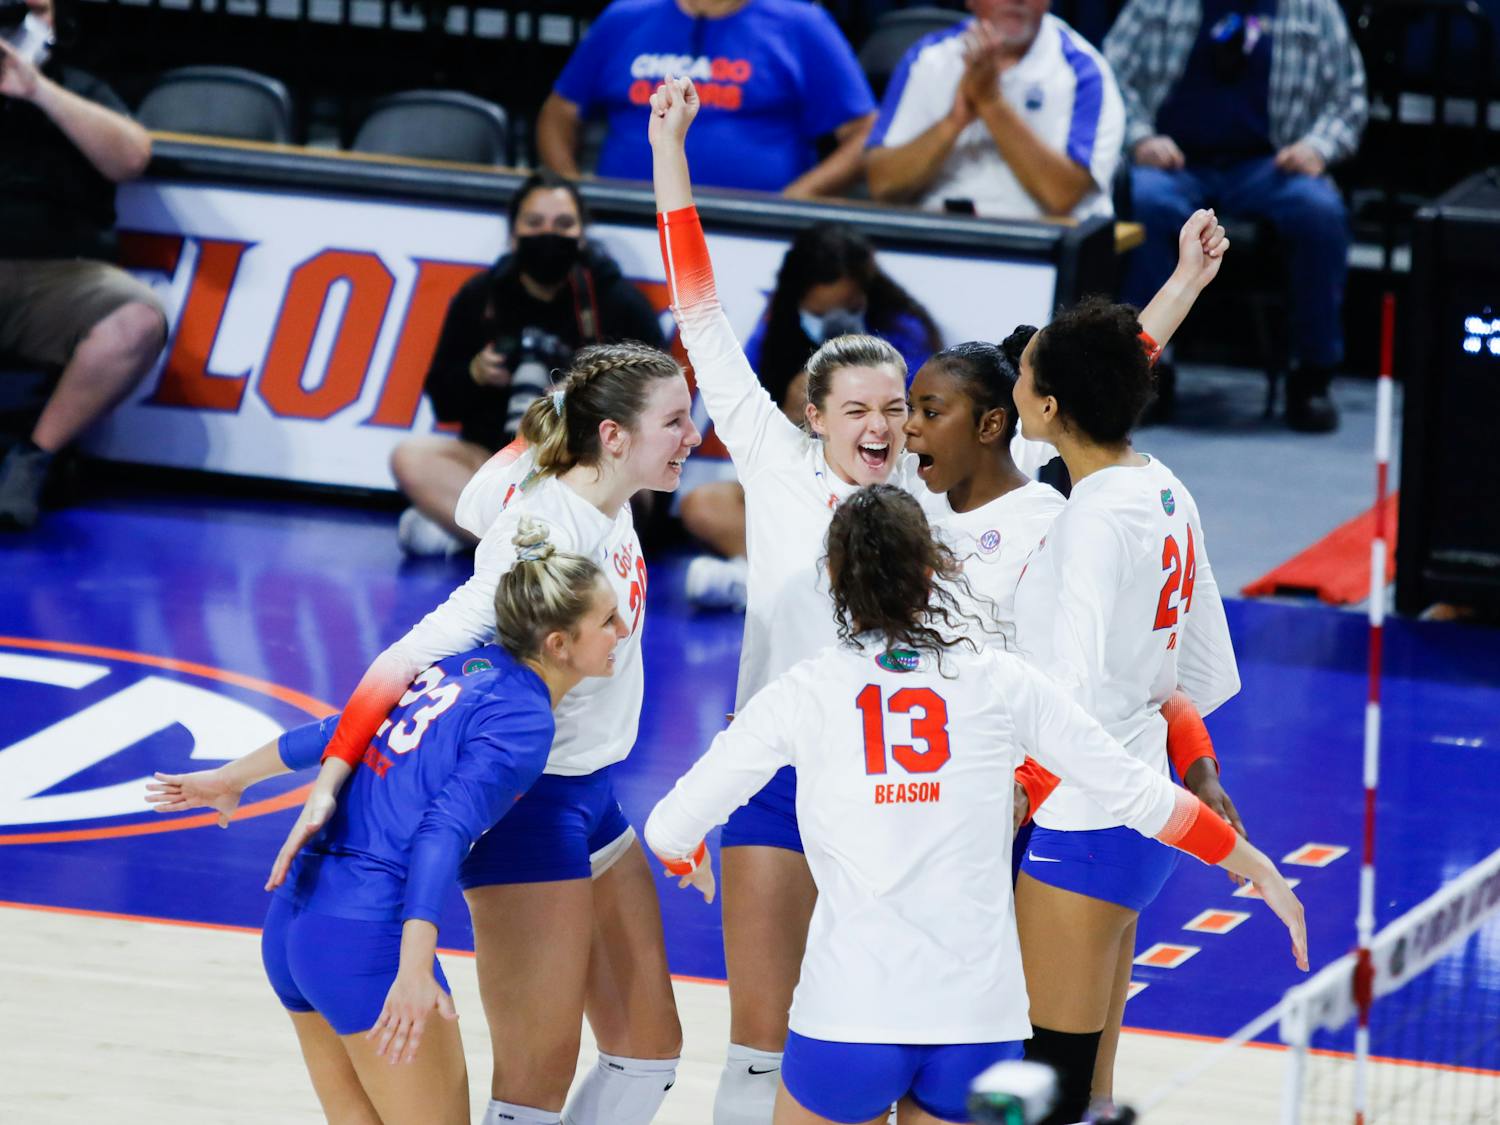 Florida's volleyball team celebrates during a match against Texas A&M on Oct. 16.